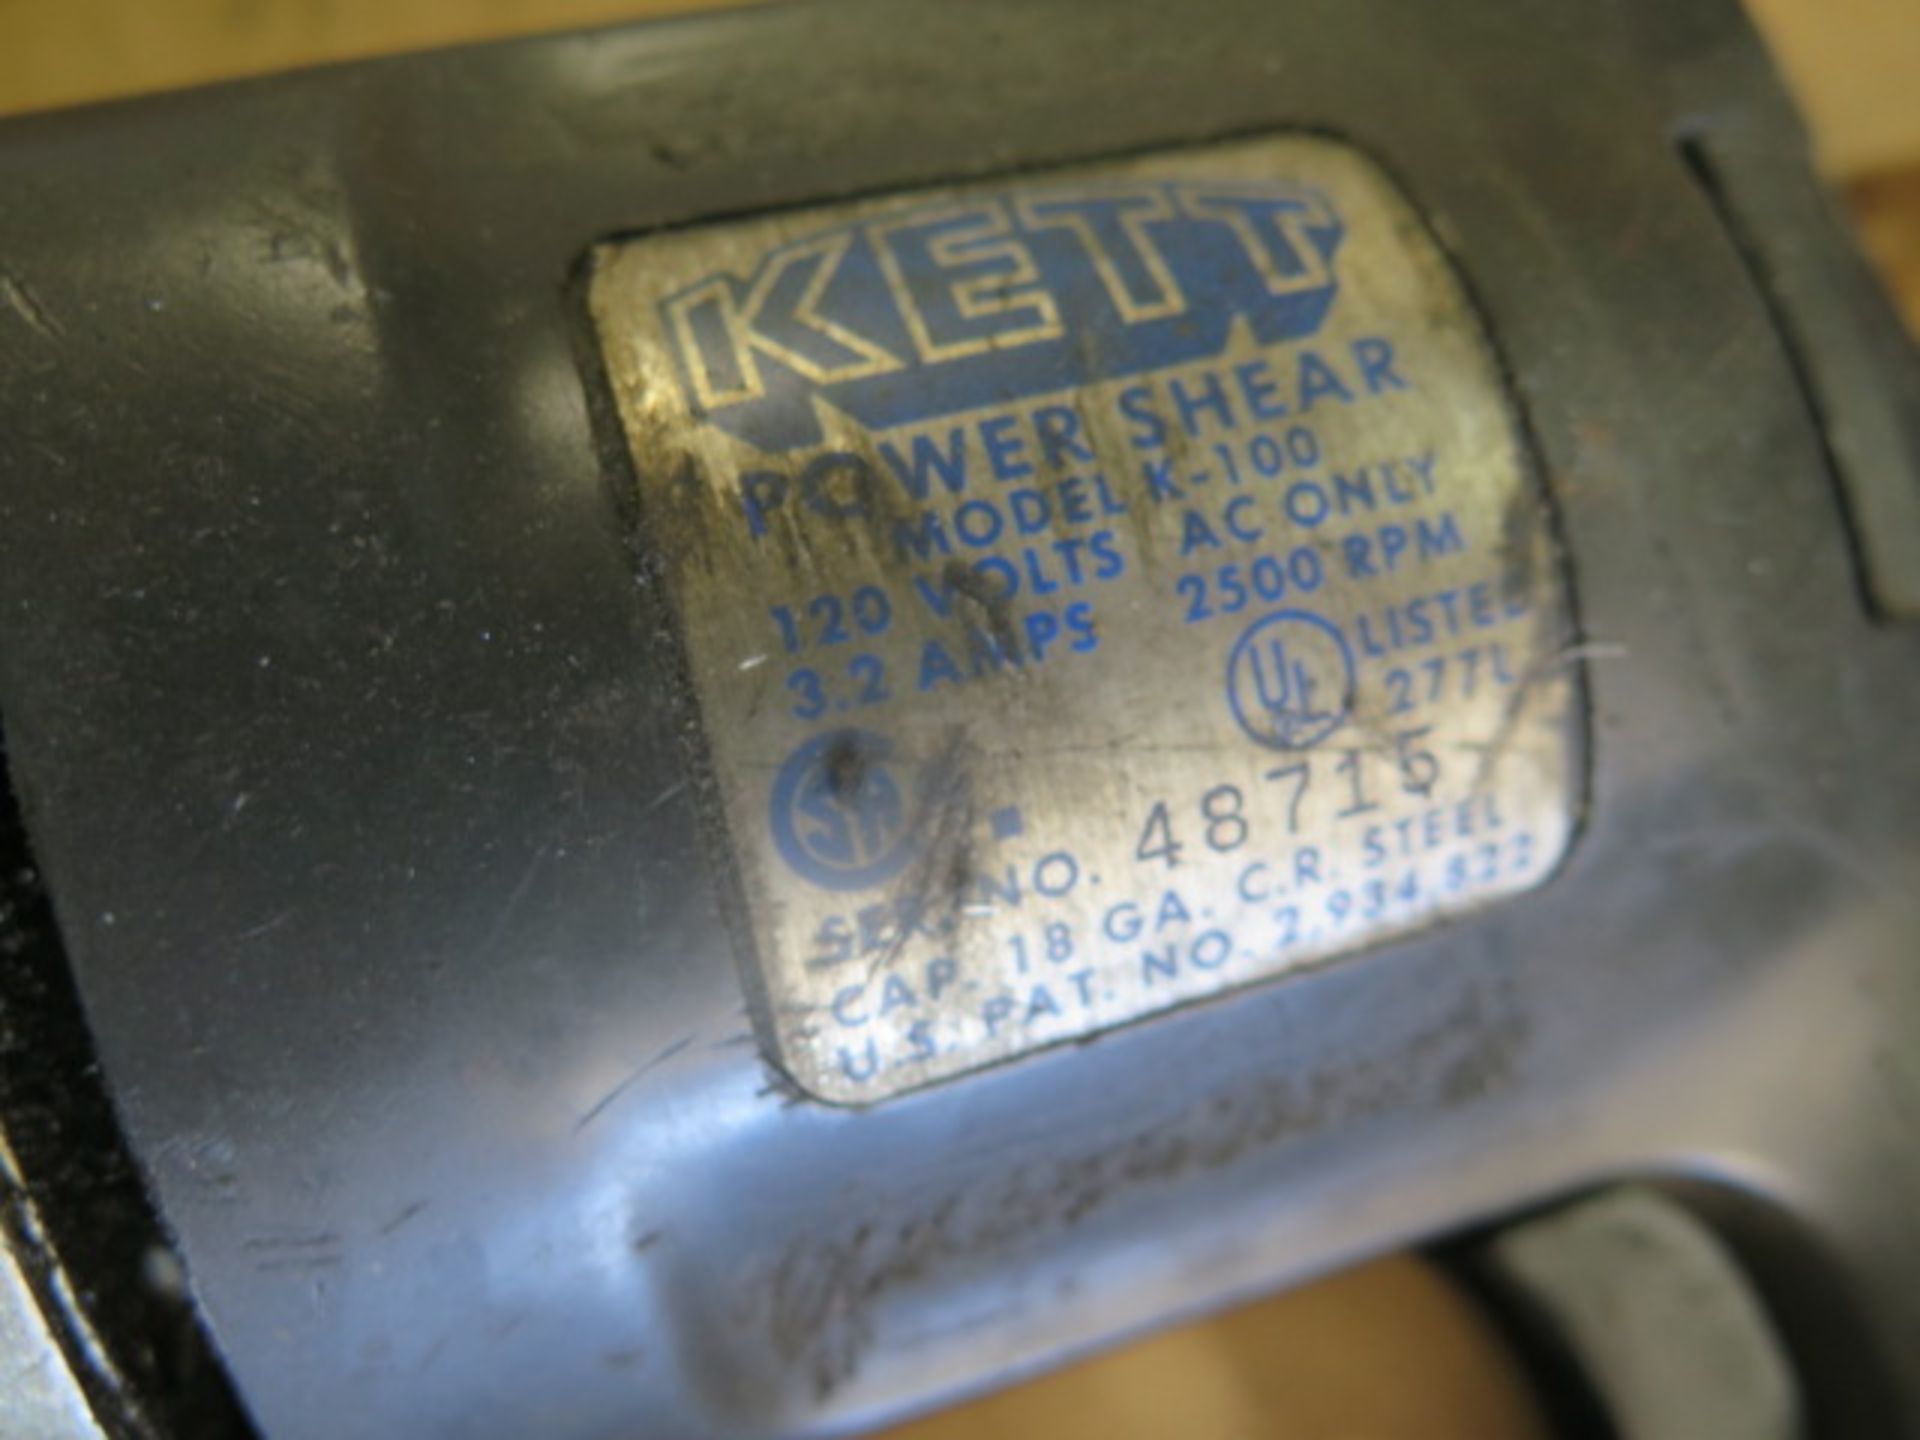 Kett Electric Power SheaR (SOLD AS-IS - NO WARRANTY) - Image 5 of 5